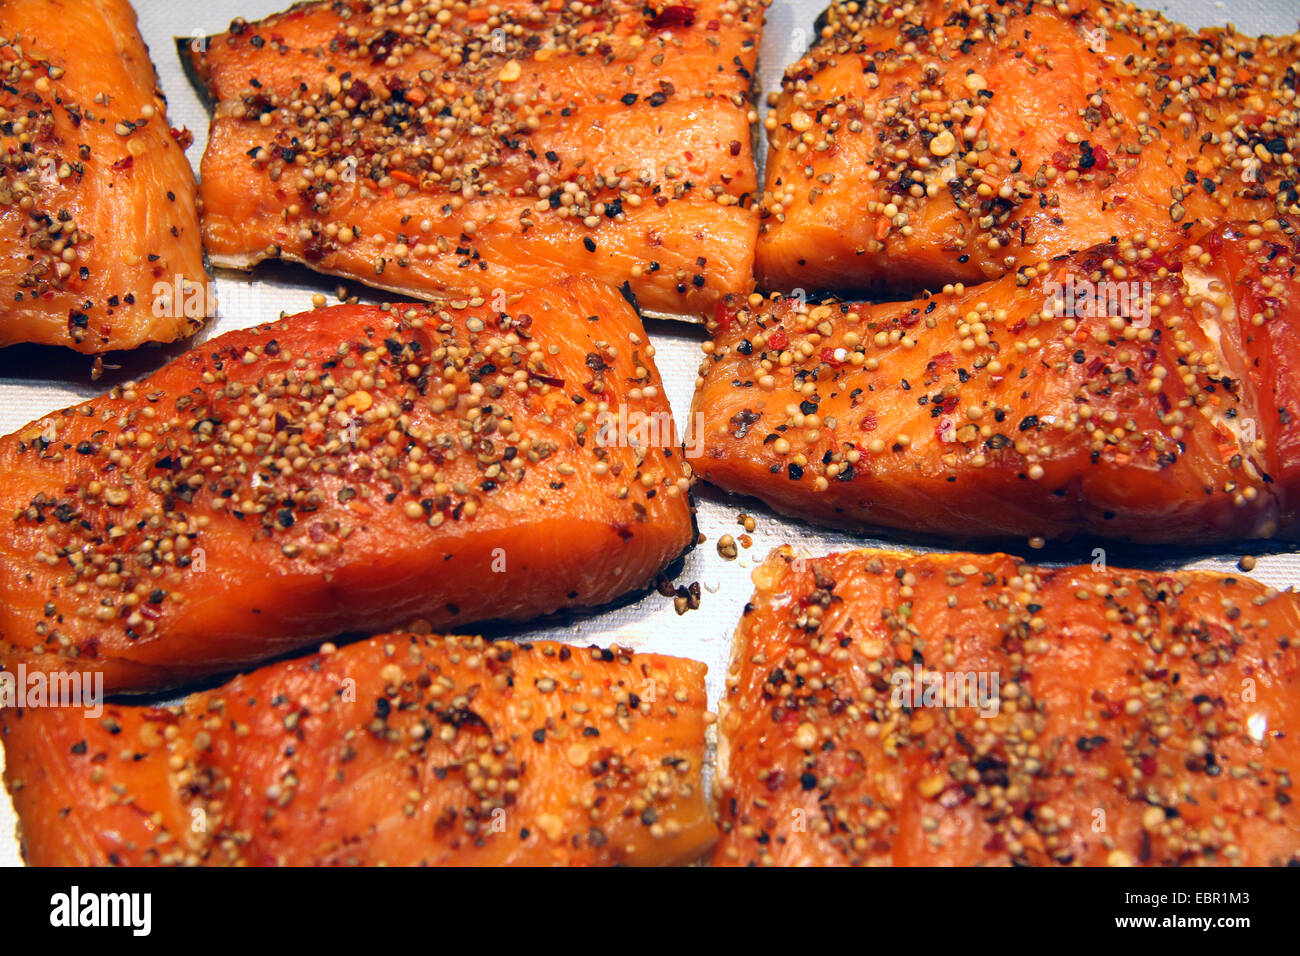 salmon with peppercorns at a fish stand, Germany Stock Photo